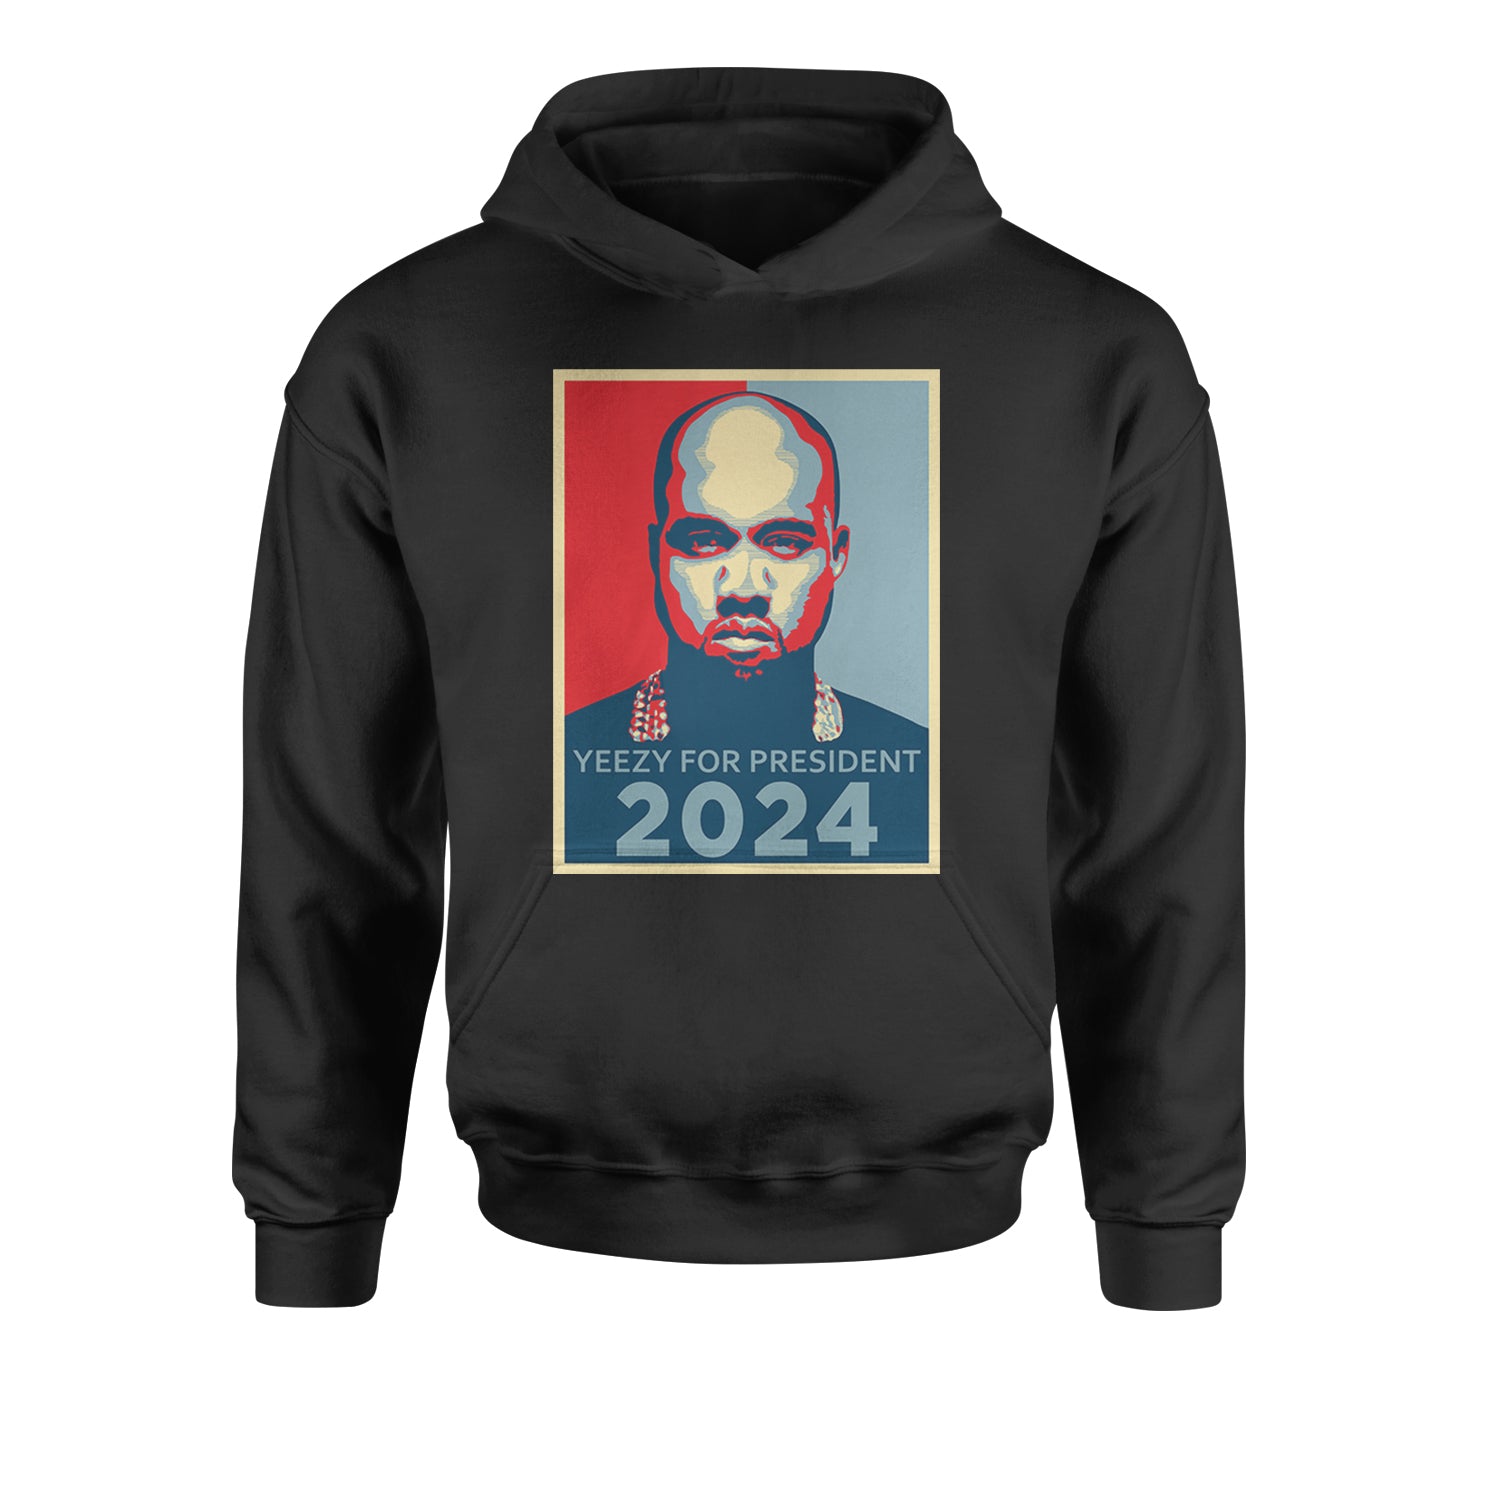 Yeezus For President Youth-Sized Hoodie